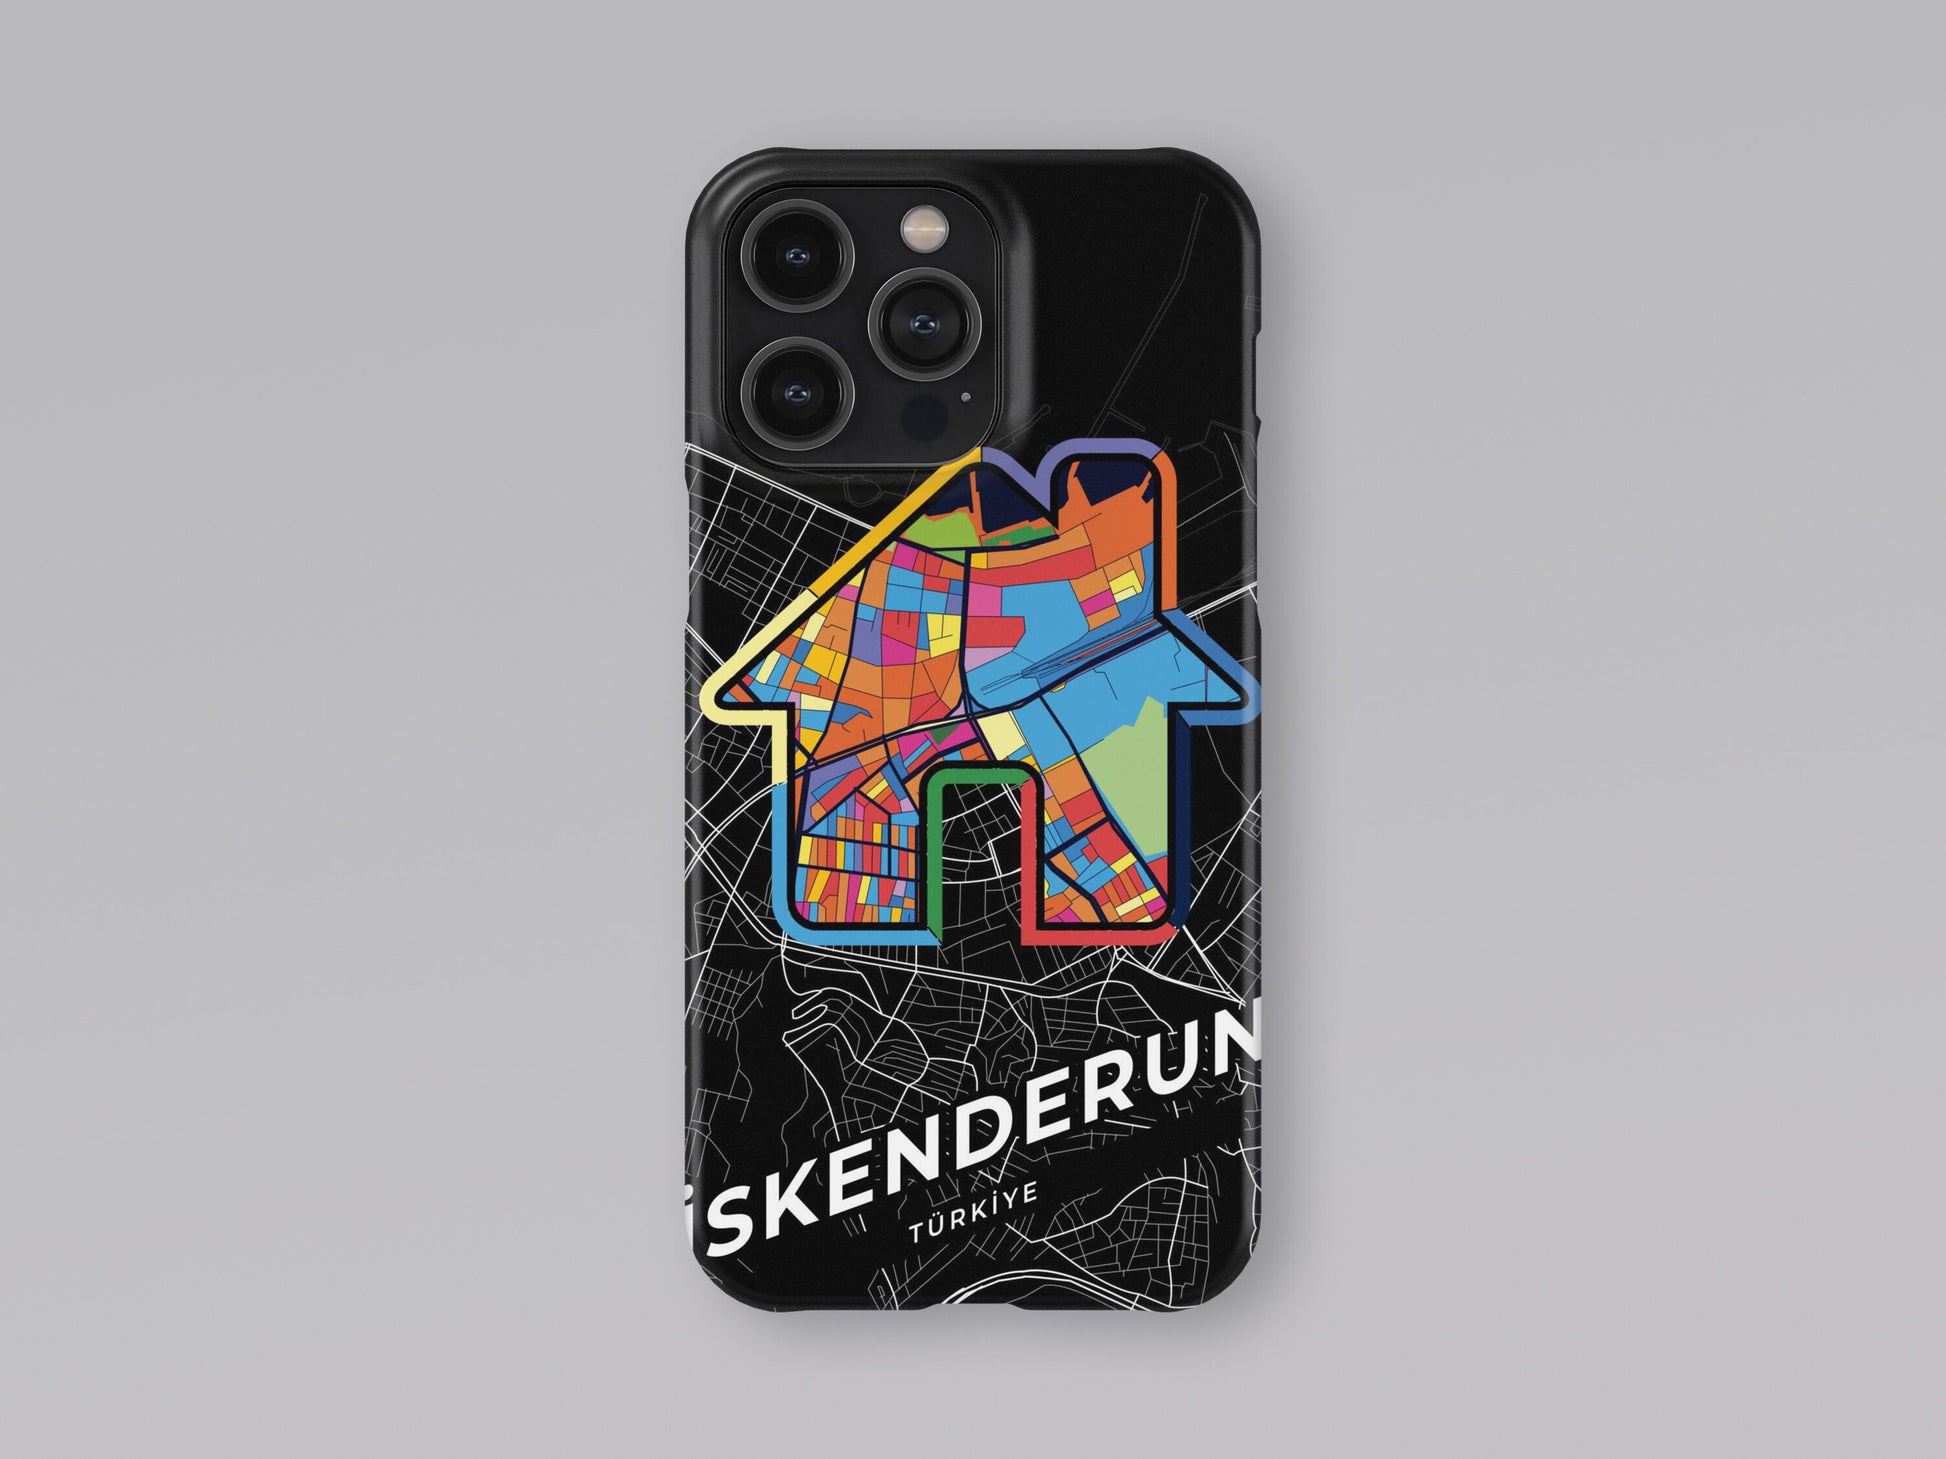 İskenderun Turkey slim phone case with colorful icon. Birthday, wedding or housewarming gift. Couple match cases. 3